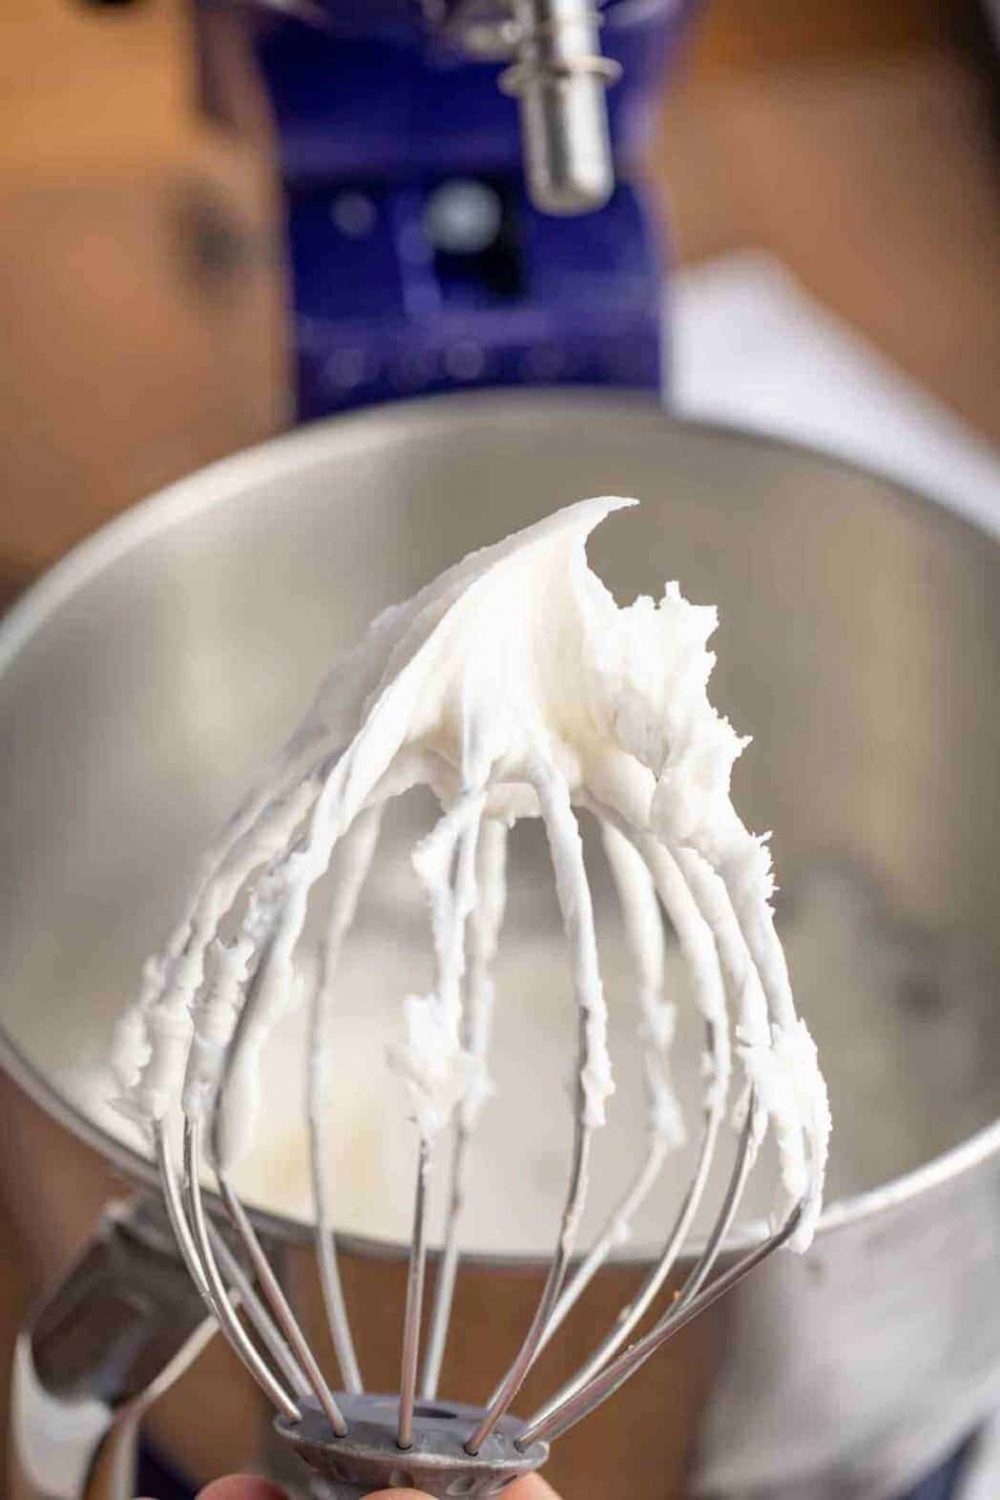 Perfect Buttercream Frosting in Just Four Simple Steps!